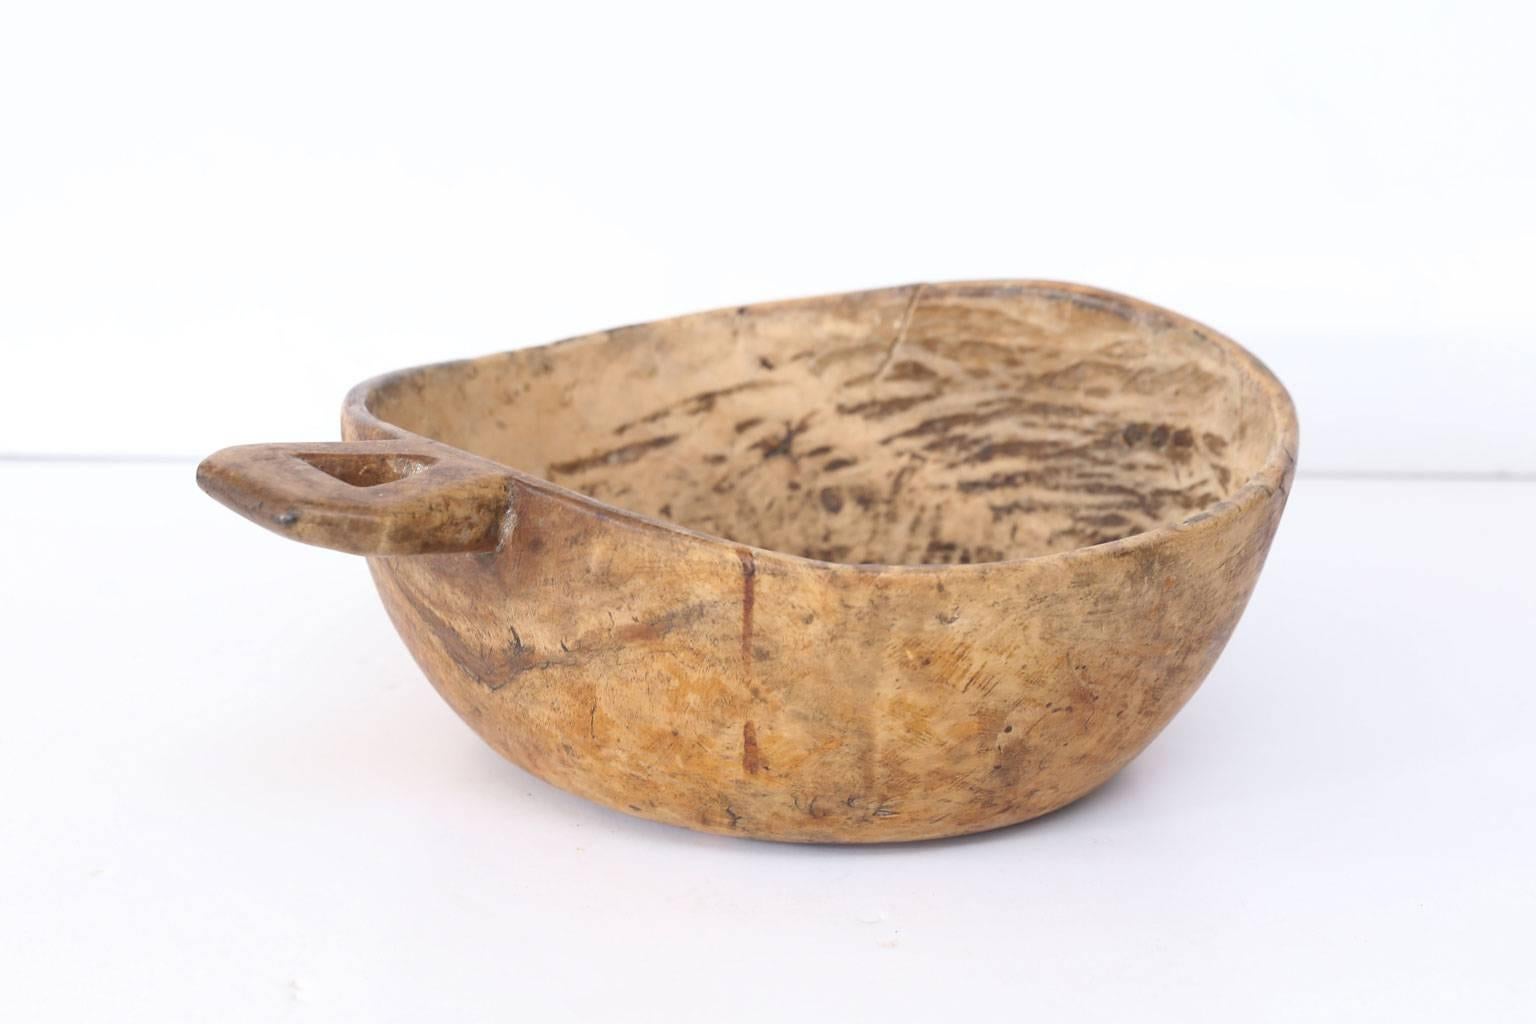 Swedish root wood bowl (19th century): Hand carved round burled root wood bowl with nice patina, coloration and handle. Three bowls available (varying sizes and prices), three bowls are pictured in the last image.